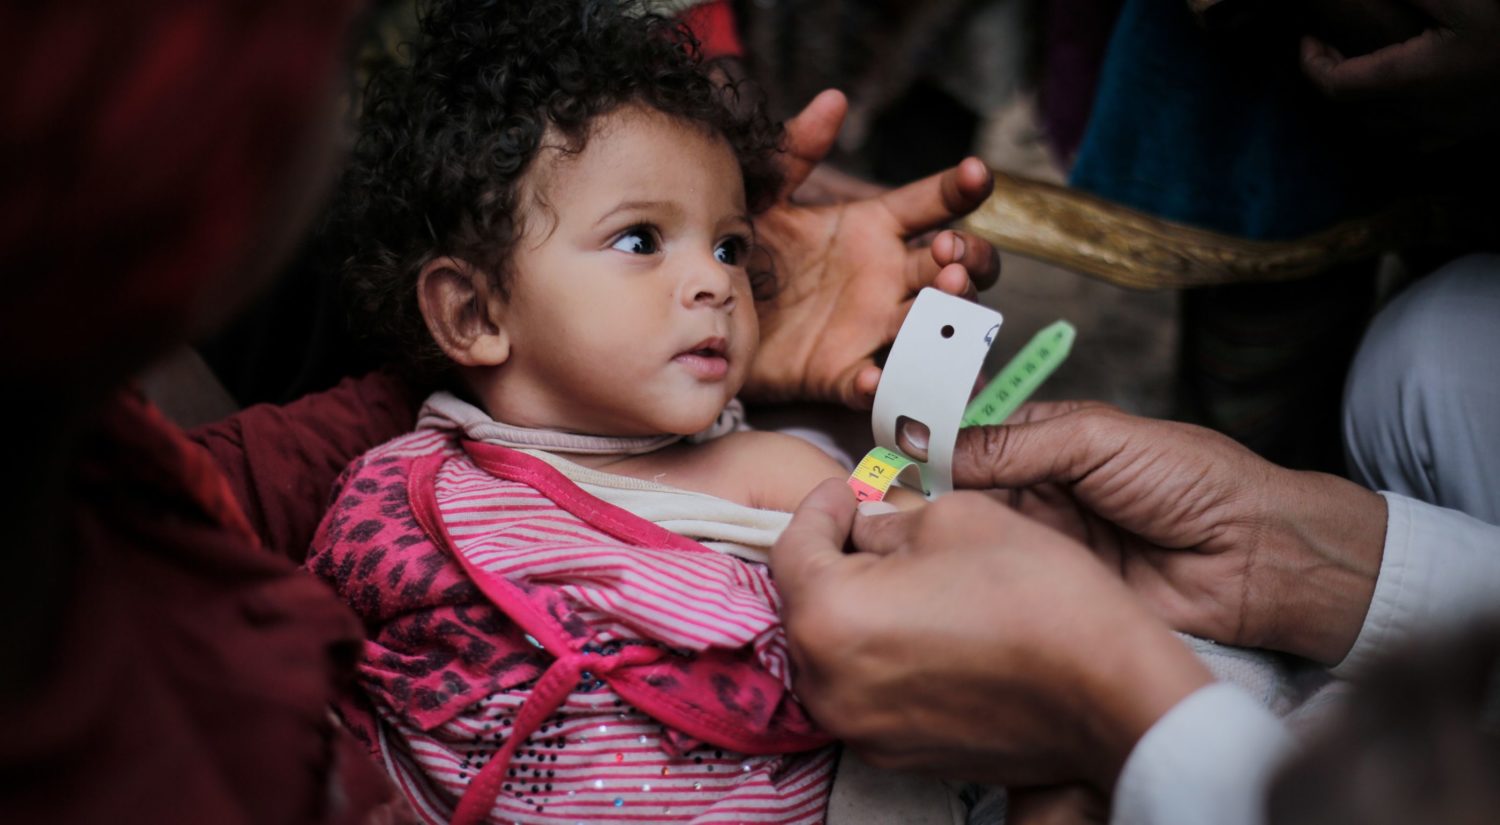 A young girl's arm is measured in Yemen to ensure that she is protected from malnutrition. Unicef/2017